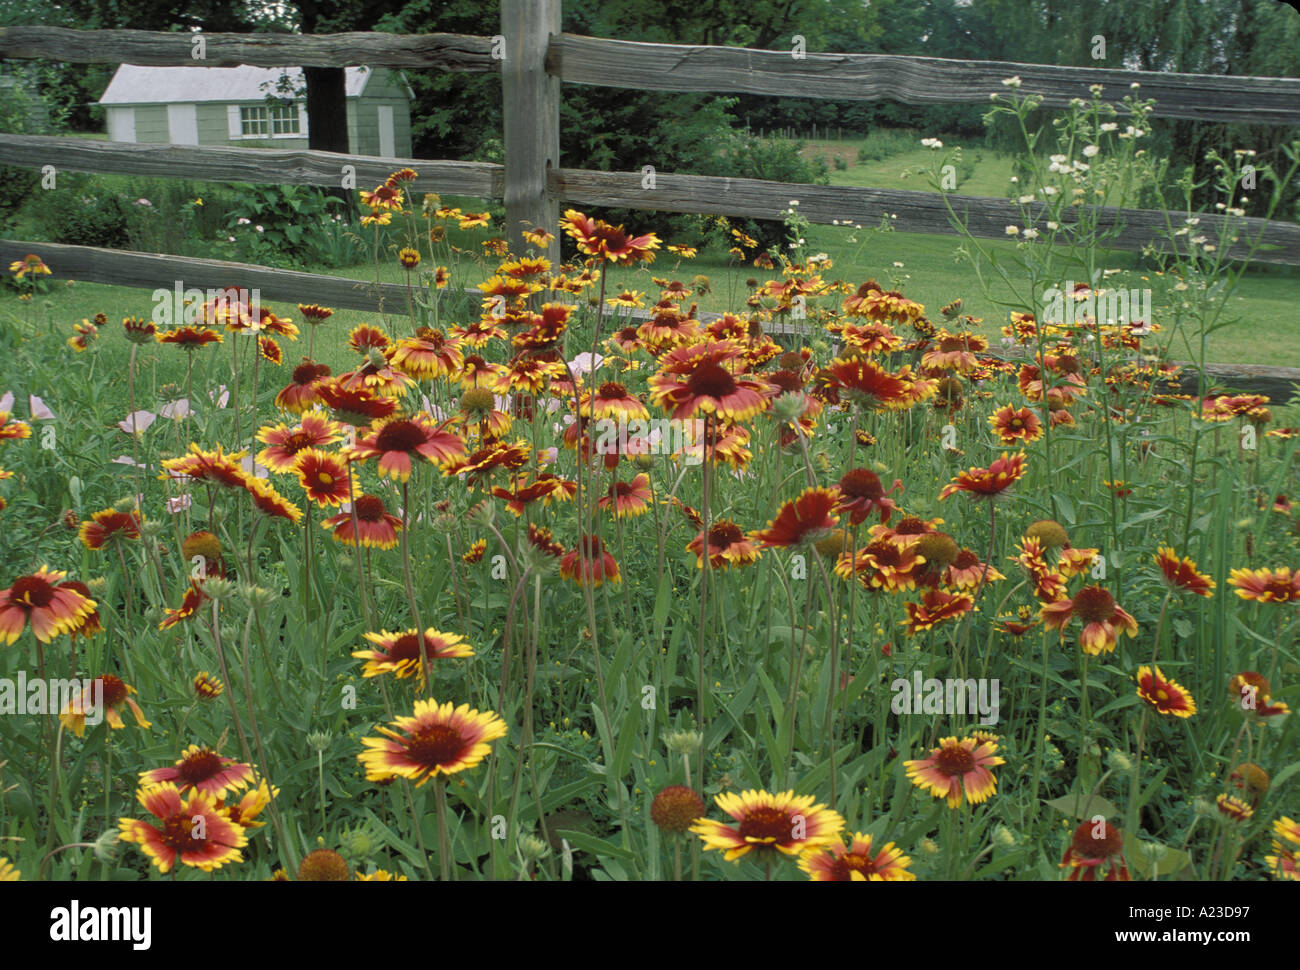 Gailardia primrose native blooming wildflowers in meadow with post and rail rustic split rail fence in old home, rural midwestern yard, Missouri, USA Stock Photo